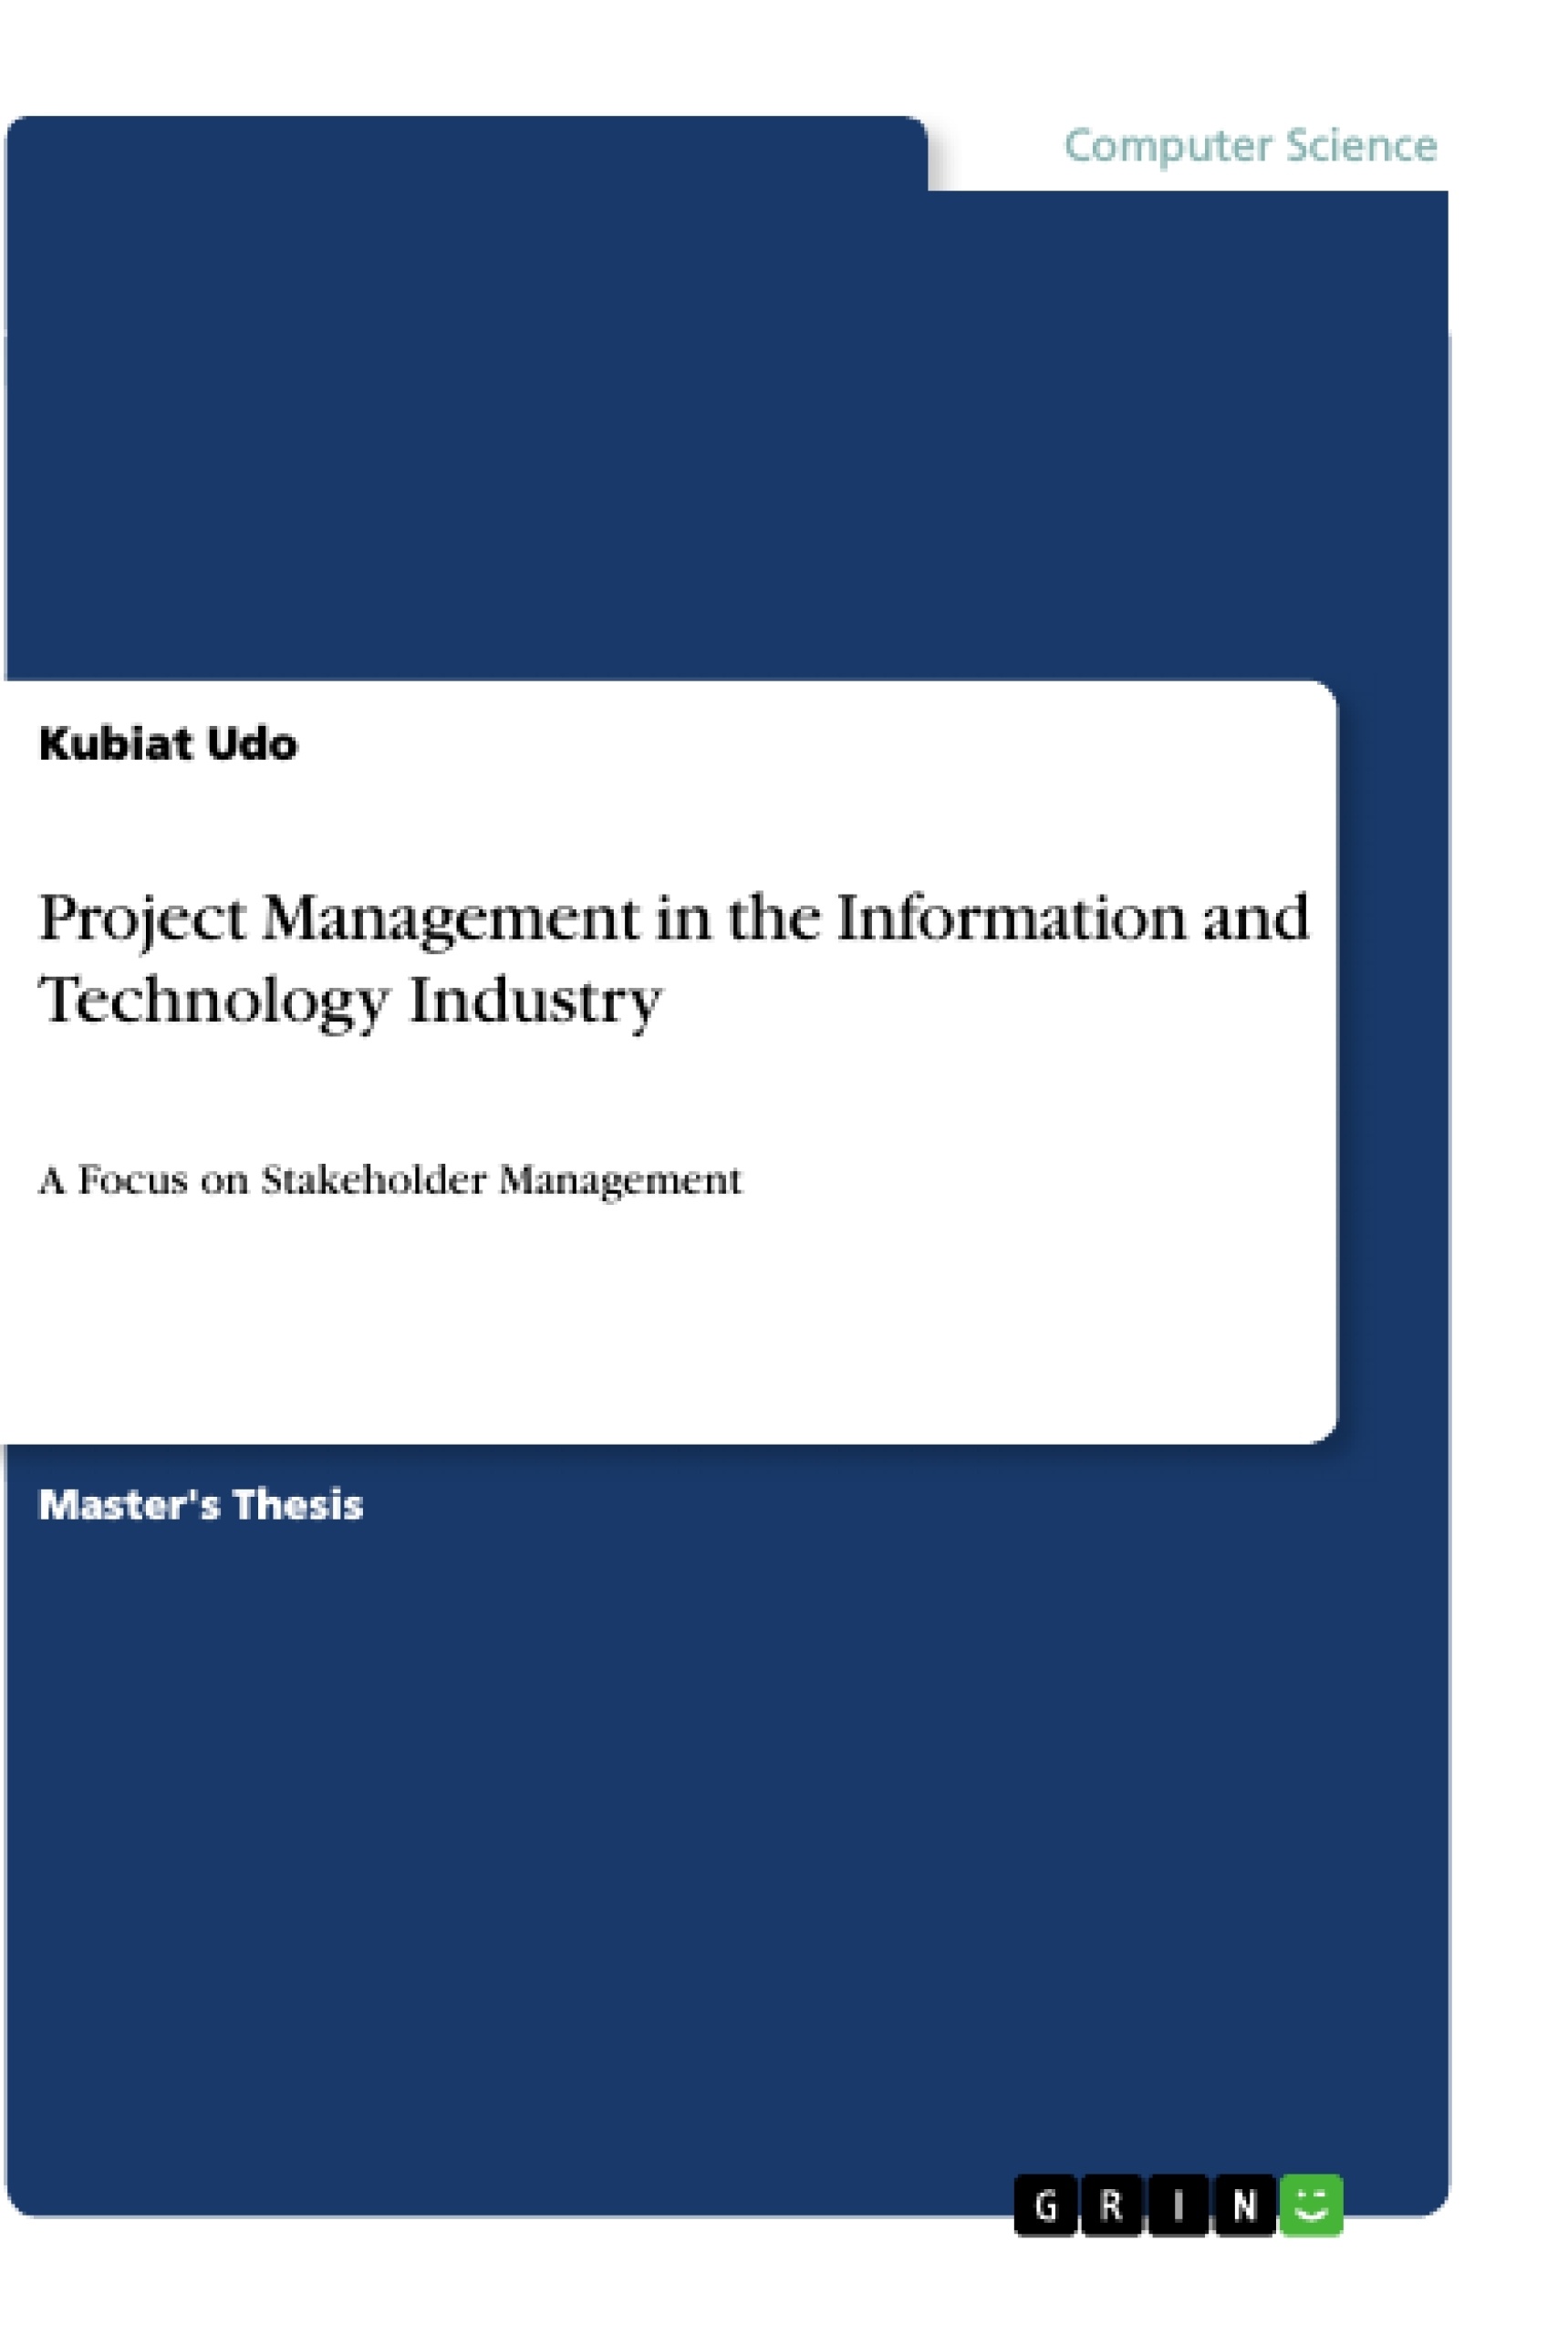 Title: Project Management in the Information and Technology Industry